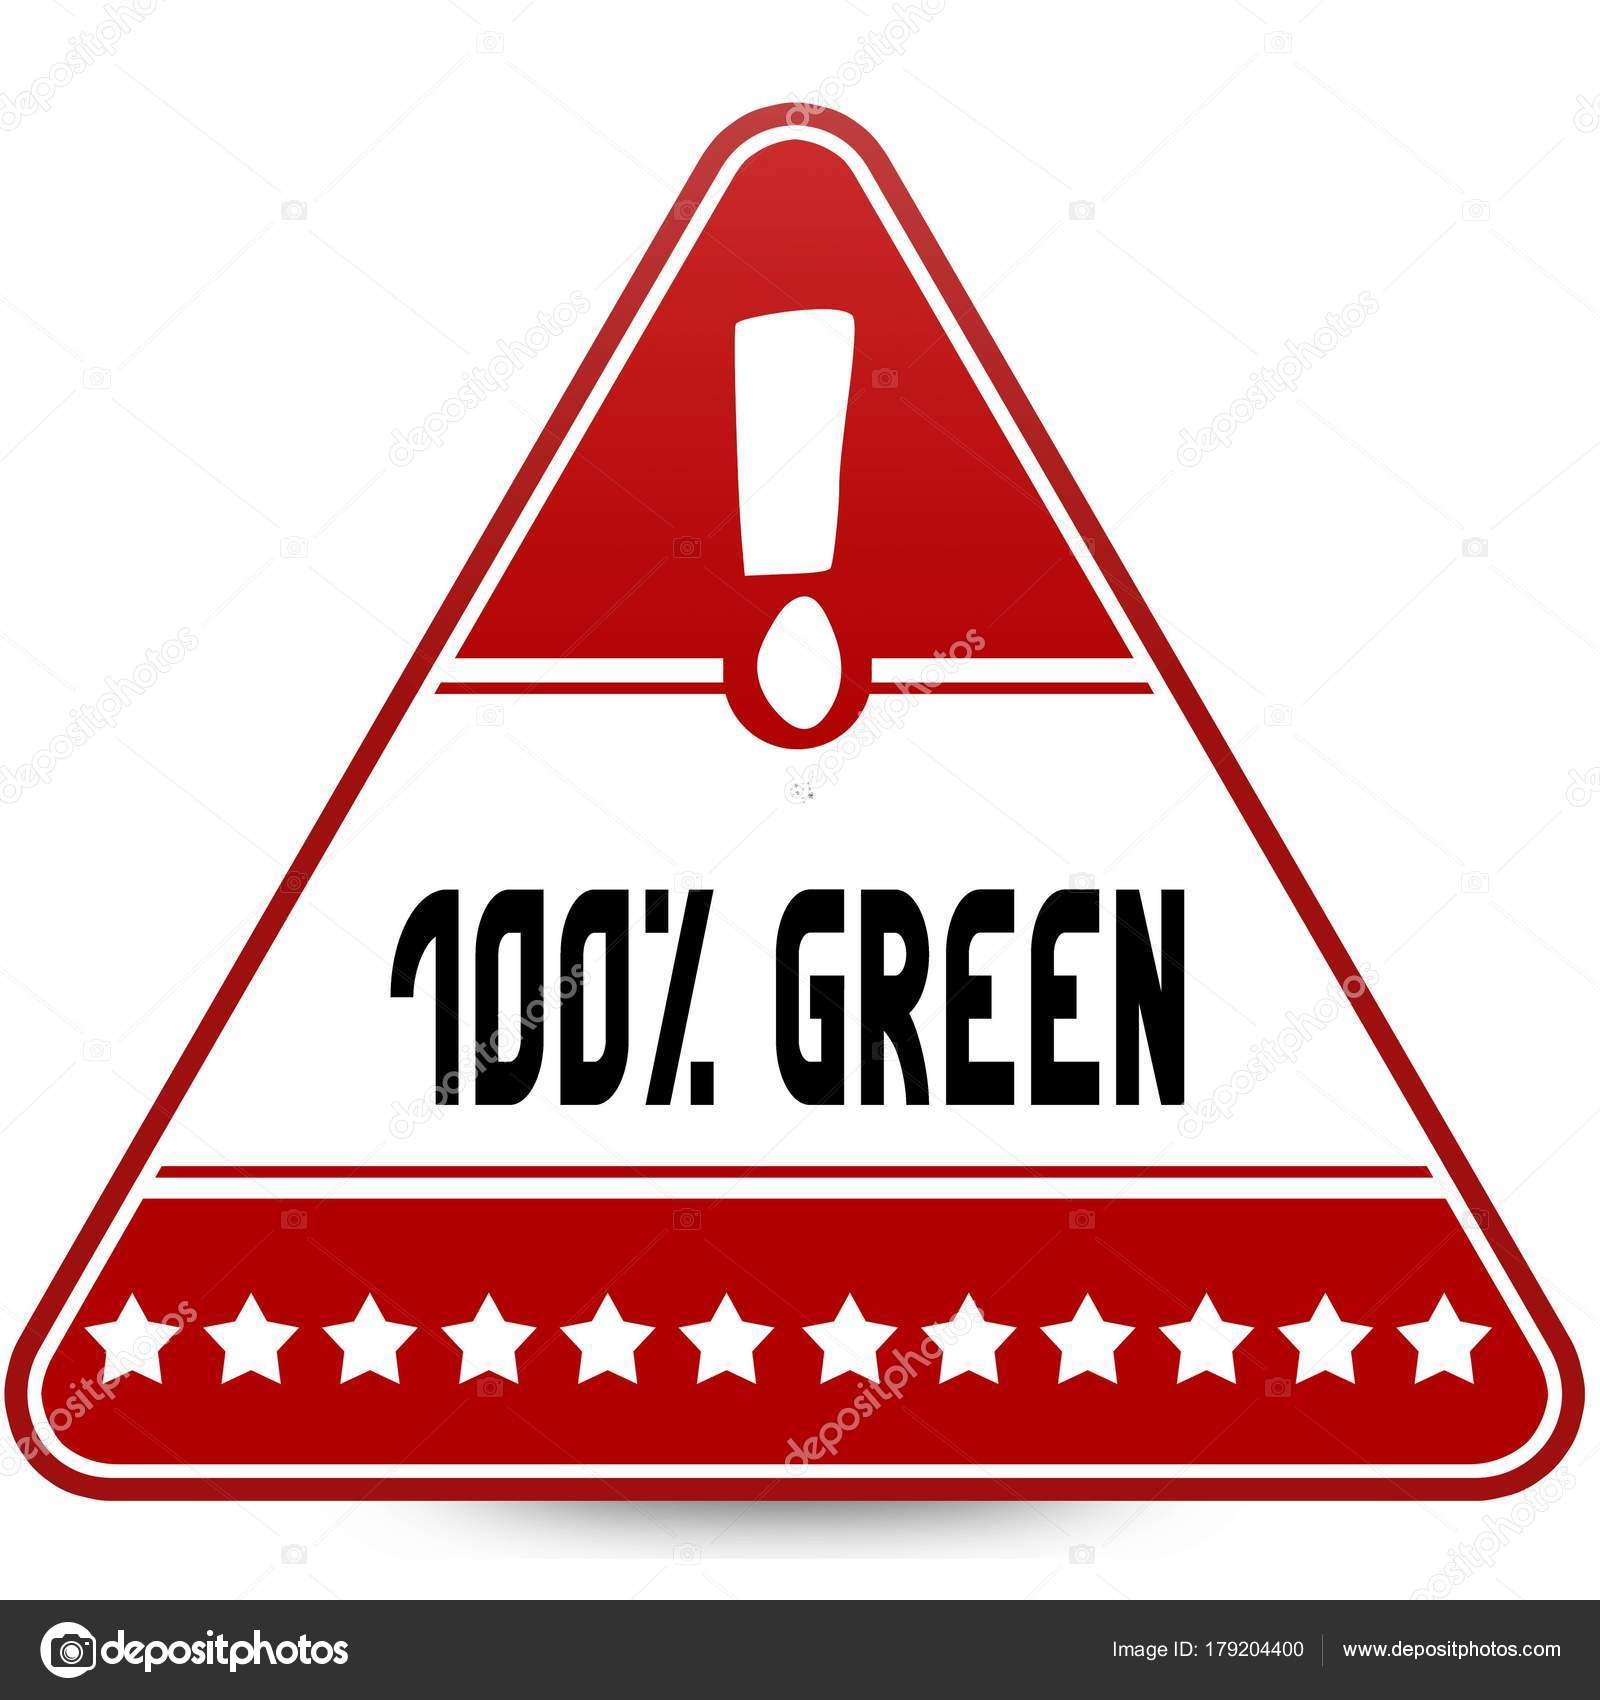 100 PERCENT GREEN on red triangle road sign. — Stock Photo ...